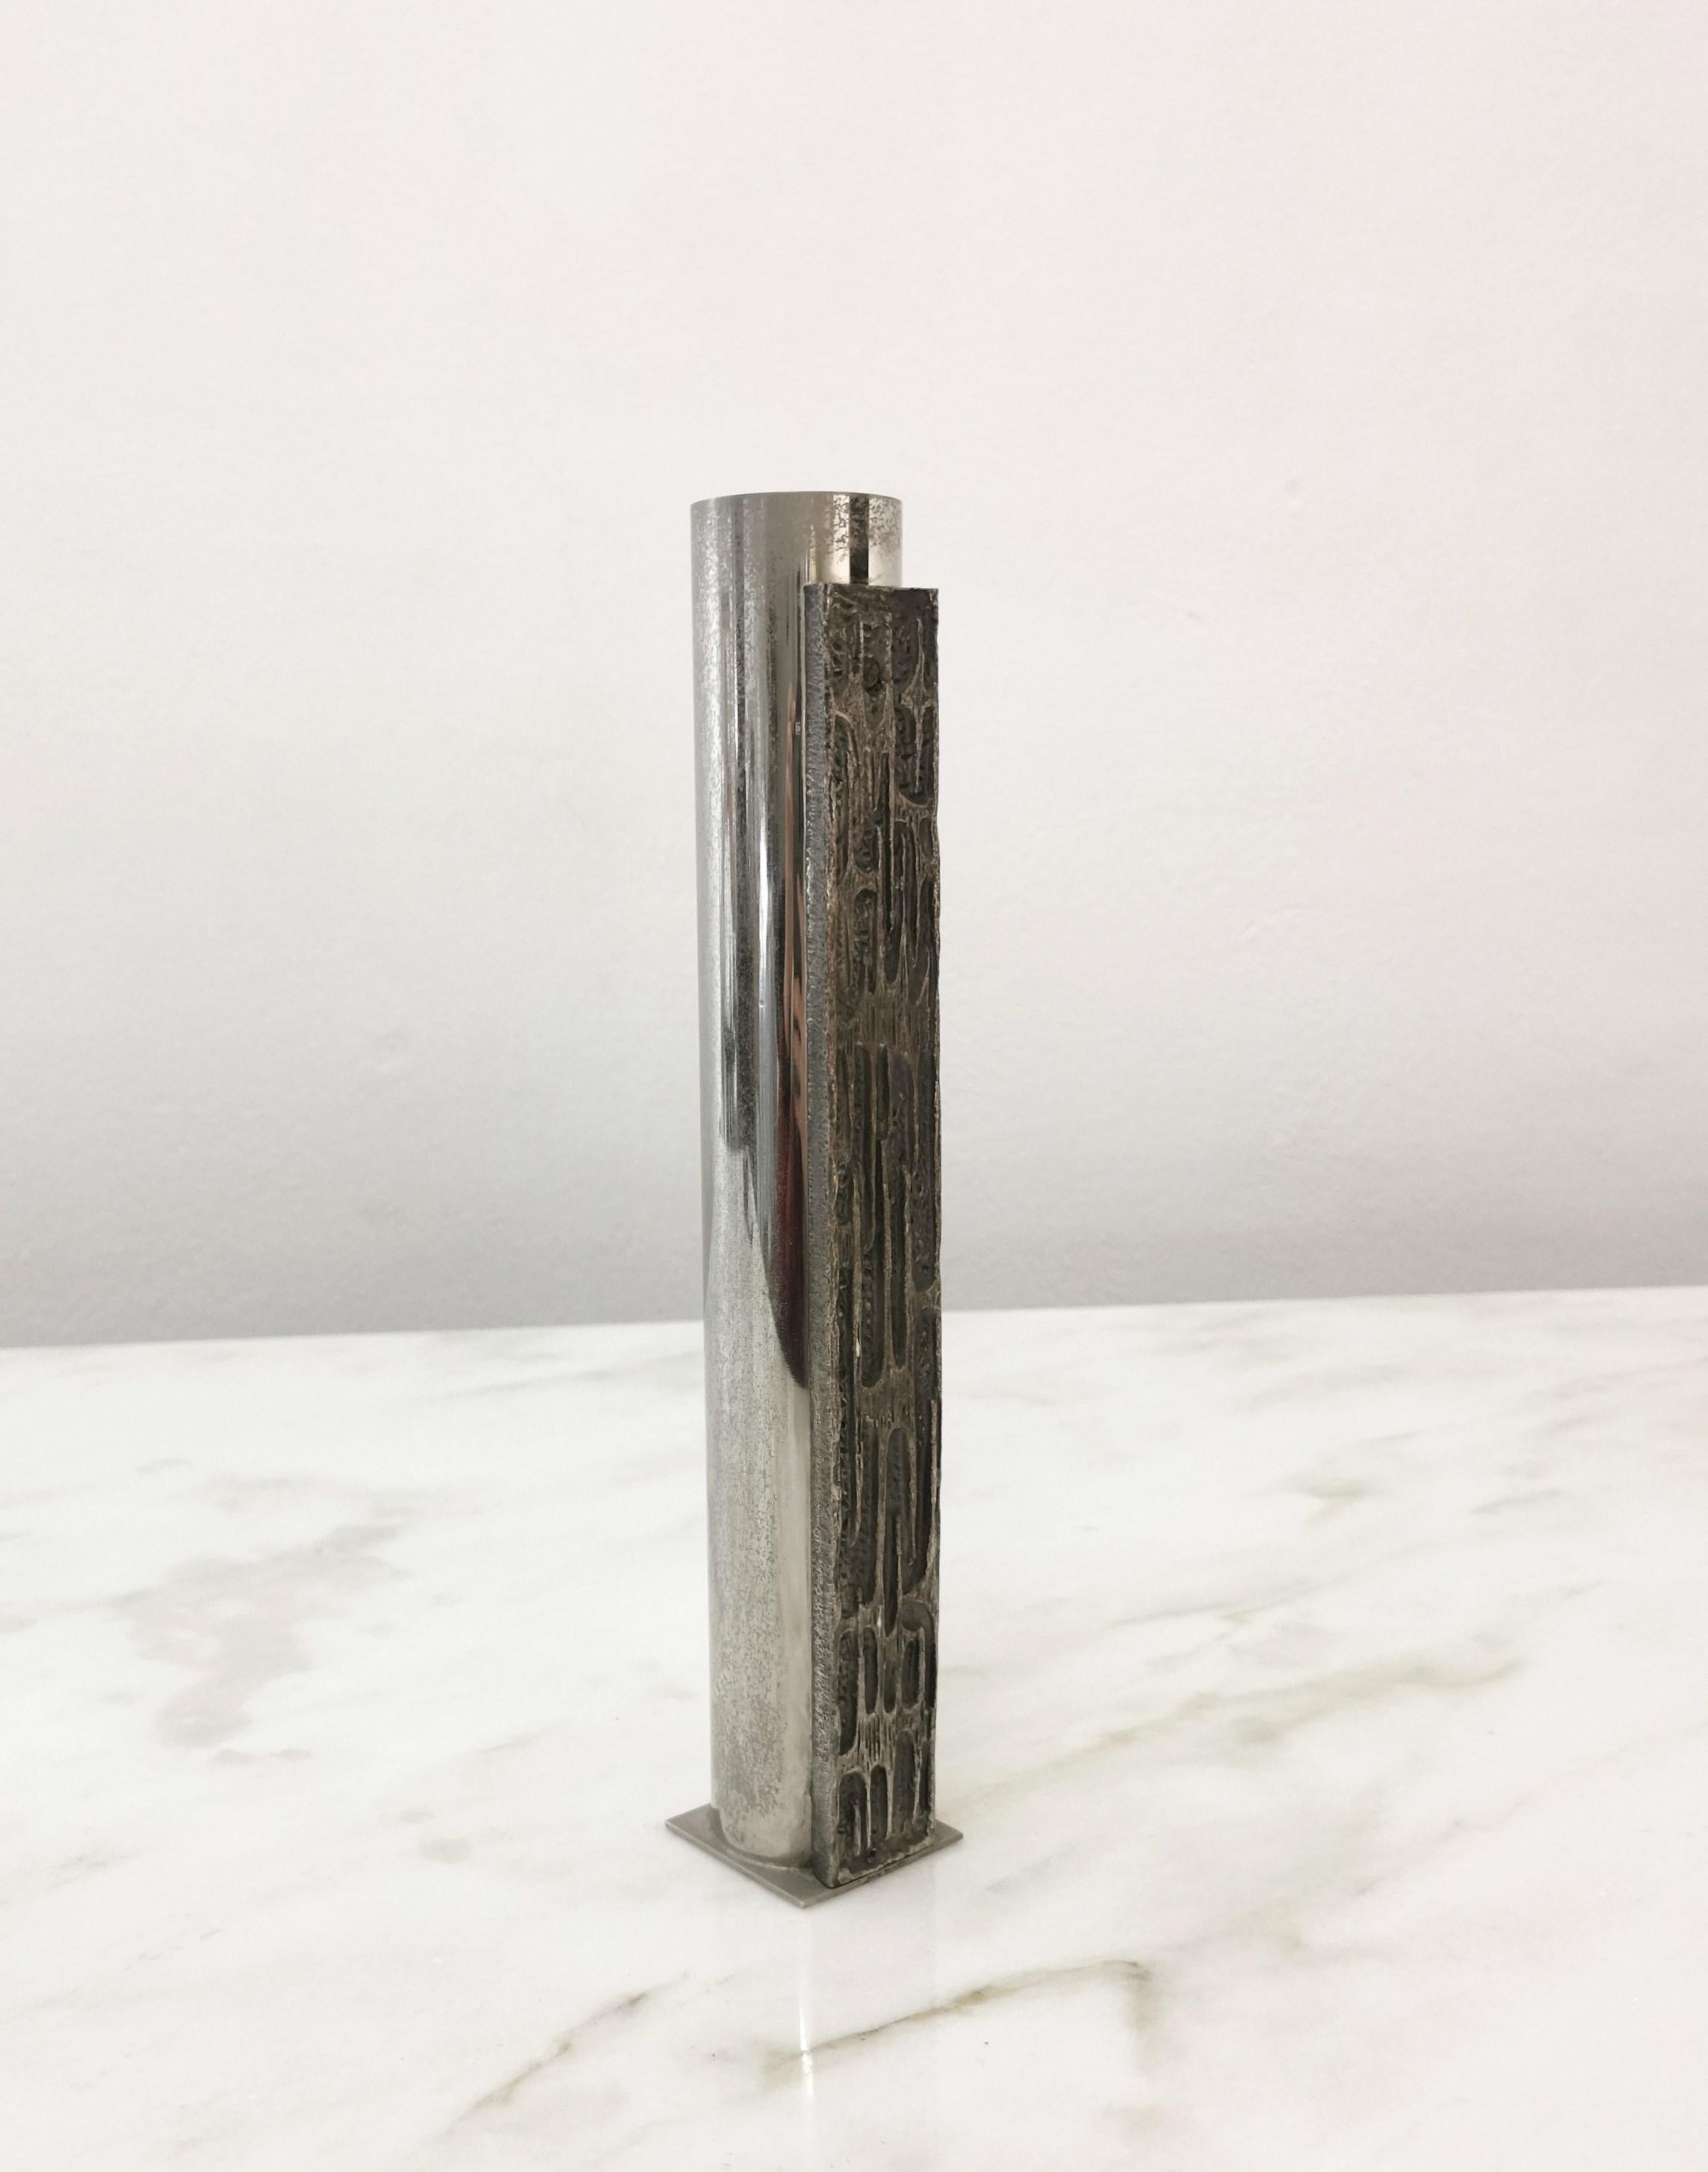 Single-flower/flower holder designed in the style of Angelo Brotto for Esperia produced in the 70s. The cylindrical flower holder was made of chromed nickel-plated brass with a central sculpture.



Note: We try to offer our customers an excellent